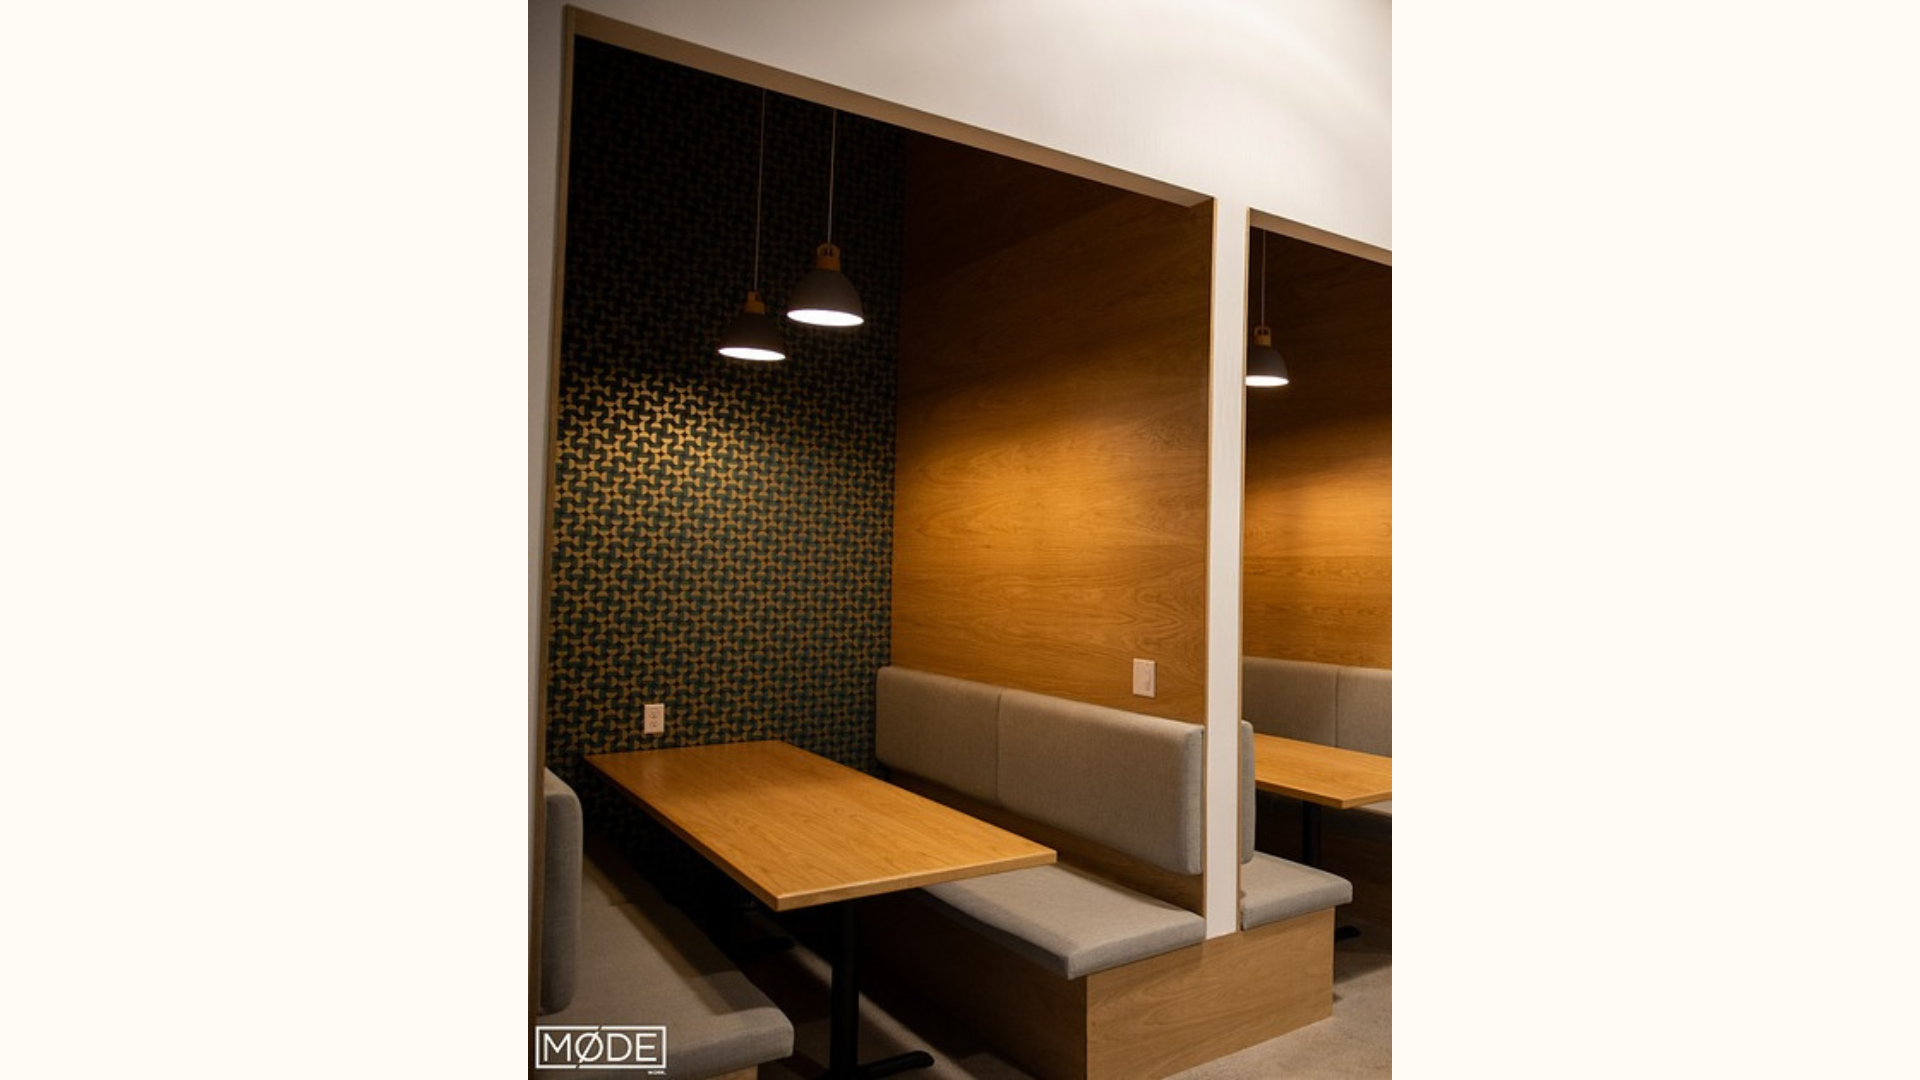 Intimate dining or meeting area in a coworking space with modern design, featuring wooden tables, gray bench seating, and decorative pendant lights above.